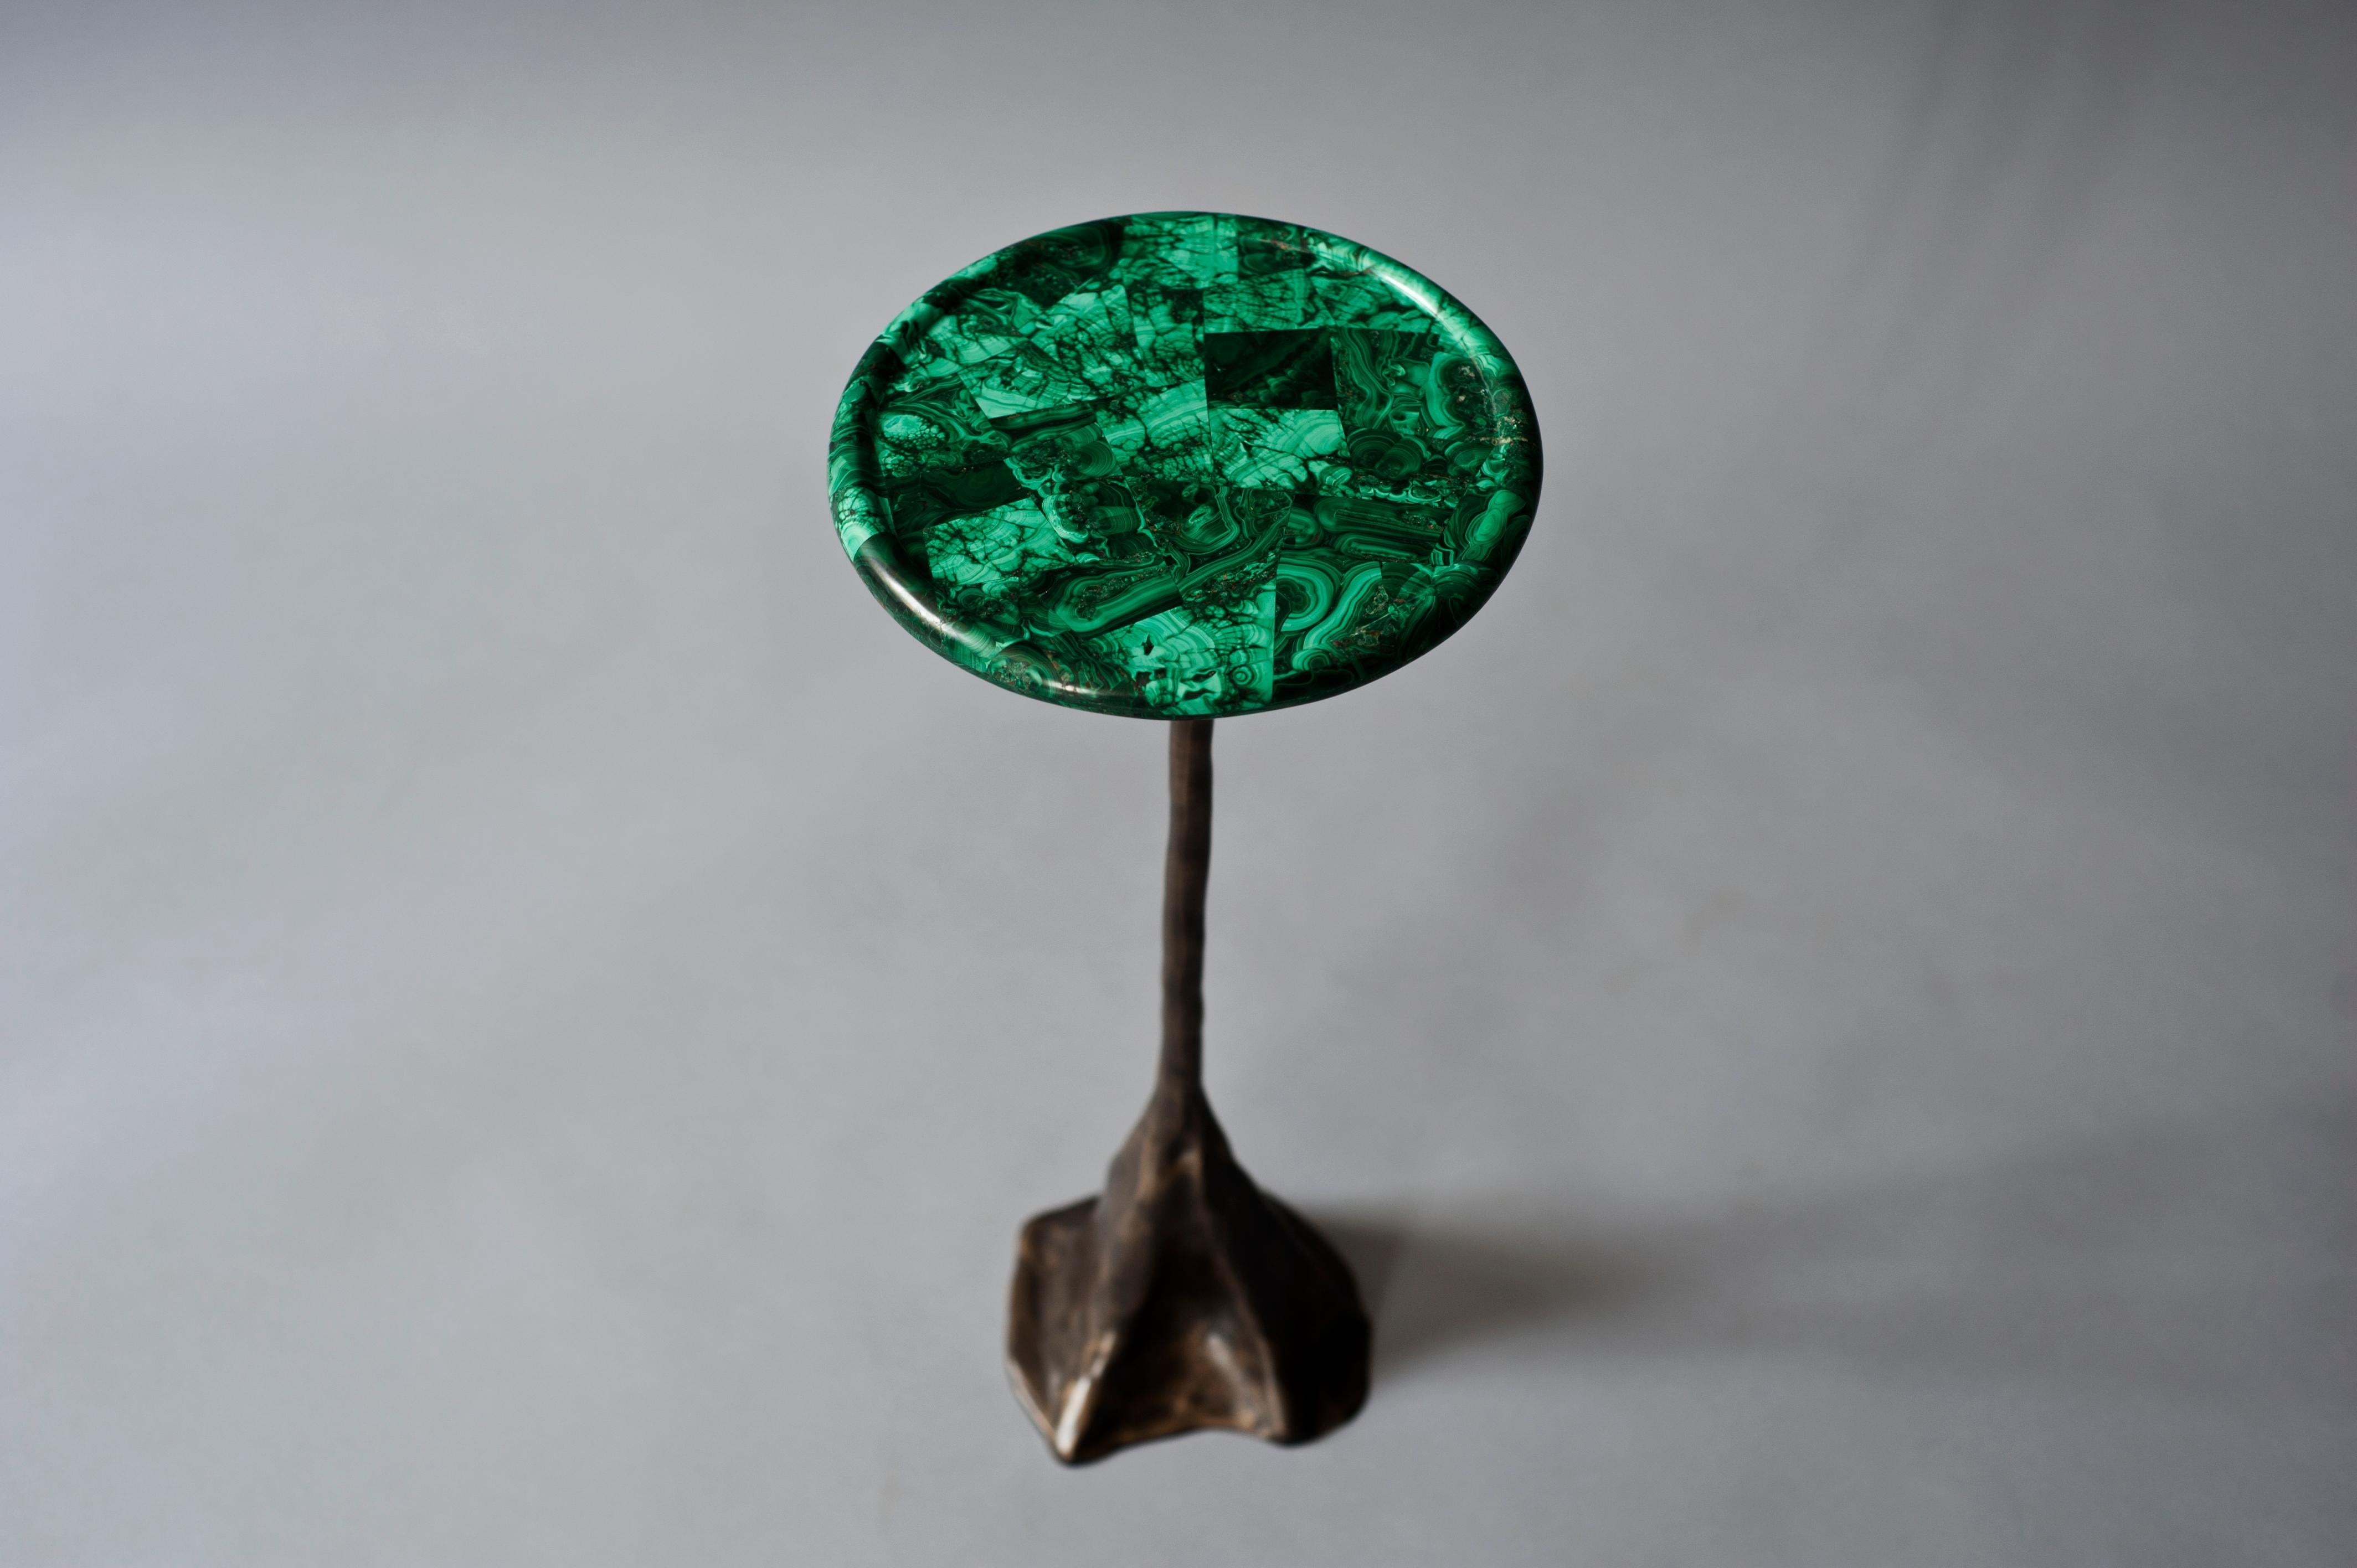 Tana side table by DeMuro Das
Dimensions: 25 x H 55.6 cm
Materials: Malachite - Polished (Random)
Solid Bronze (Antique)
Dimensions and finishes can be customized.
DeMuro Das is an international design firm and the aesthetic and cultural